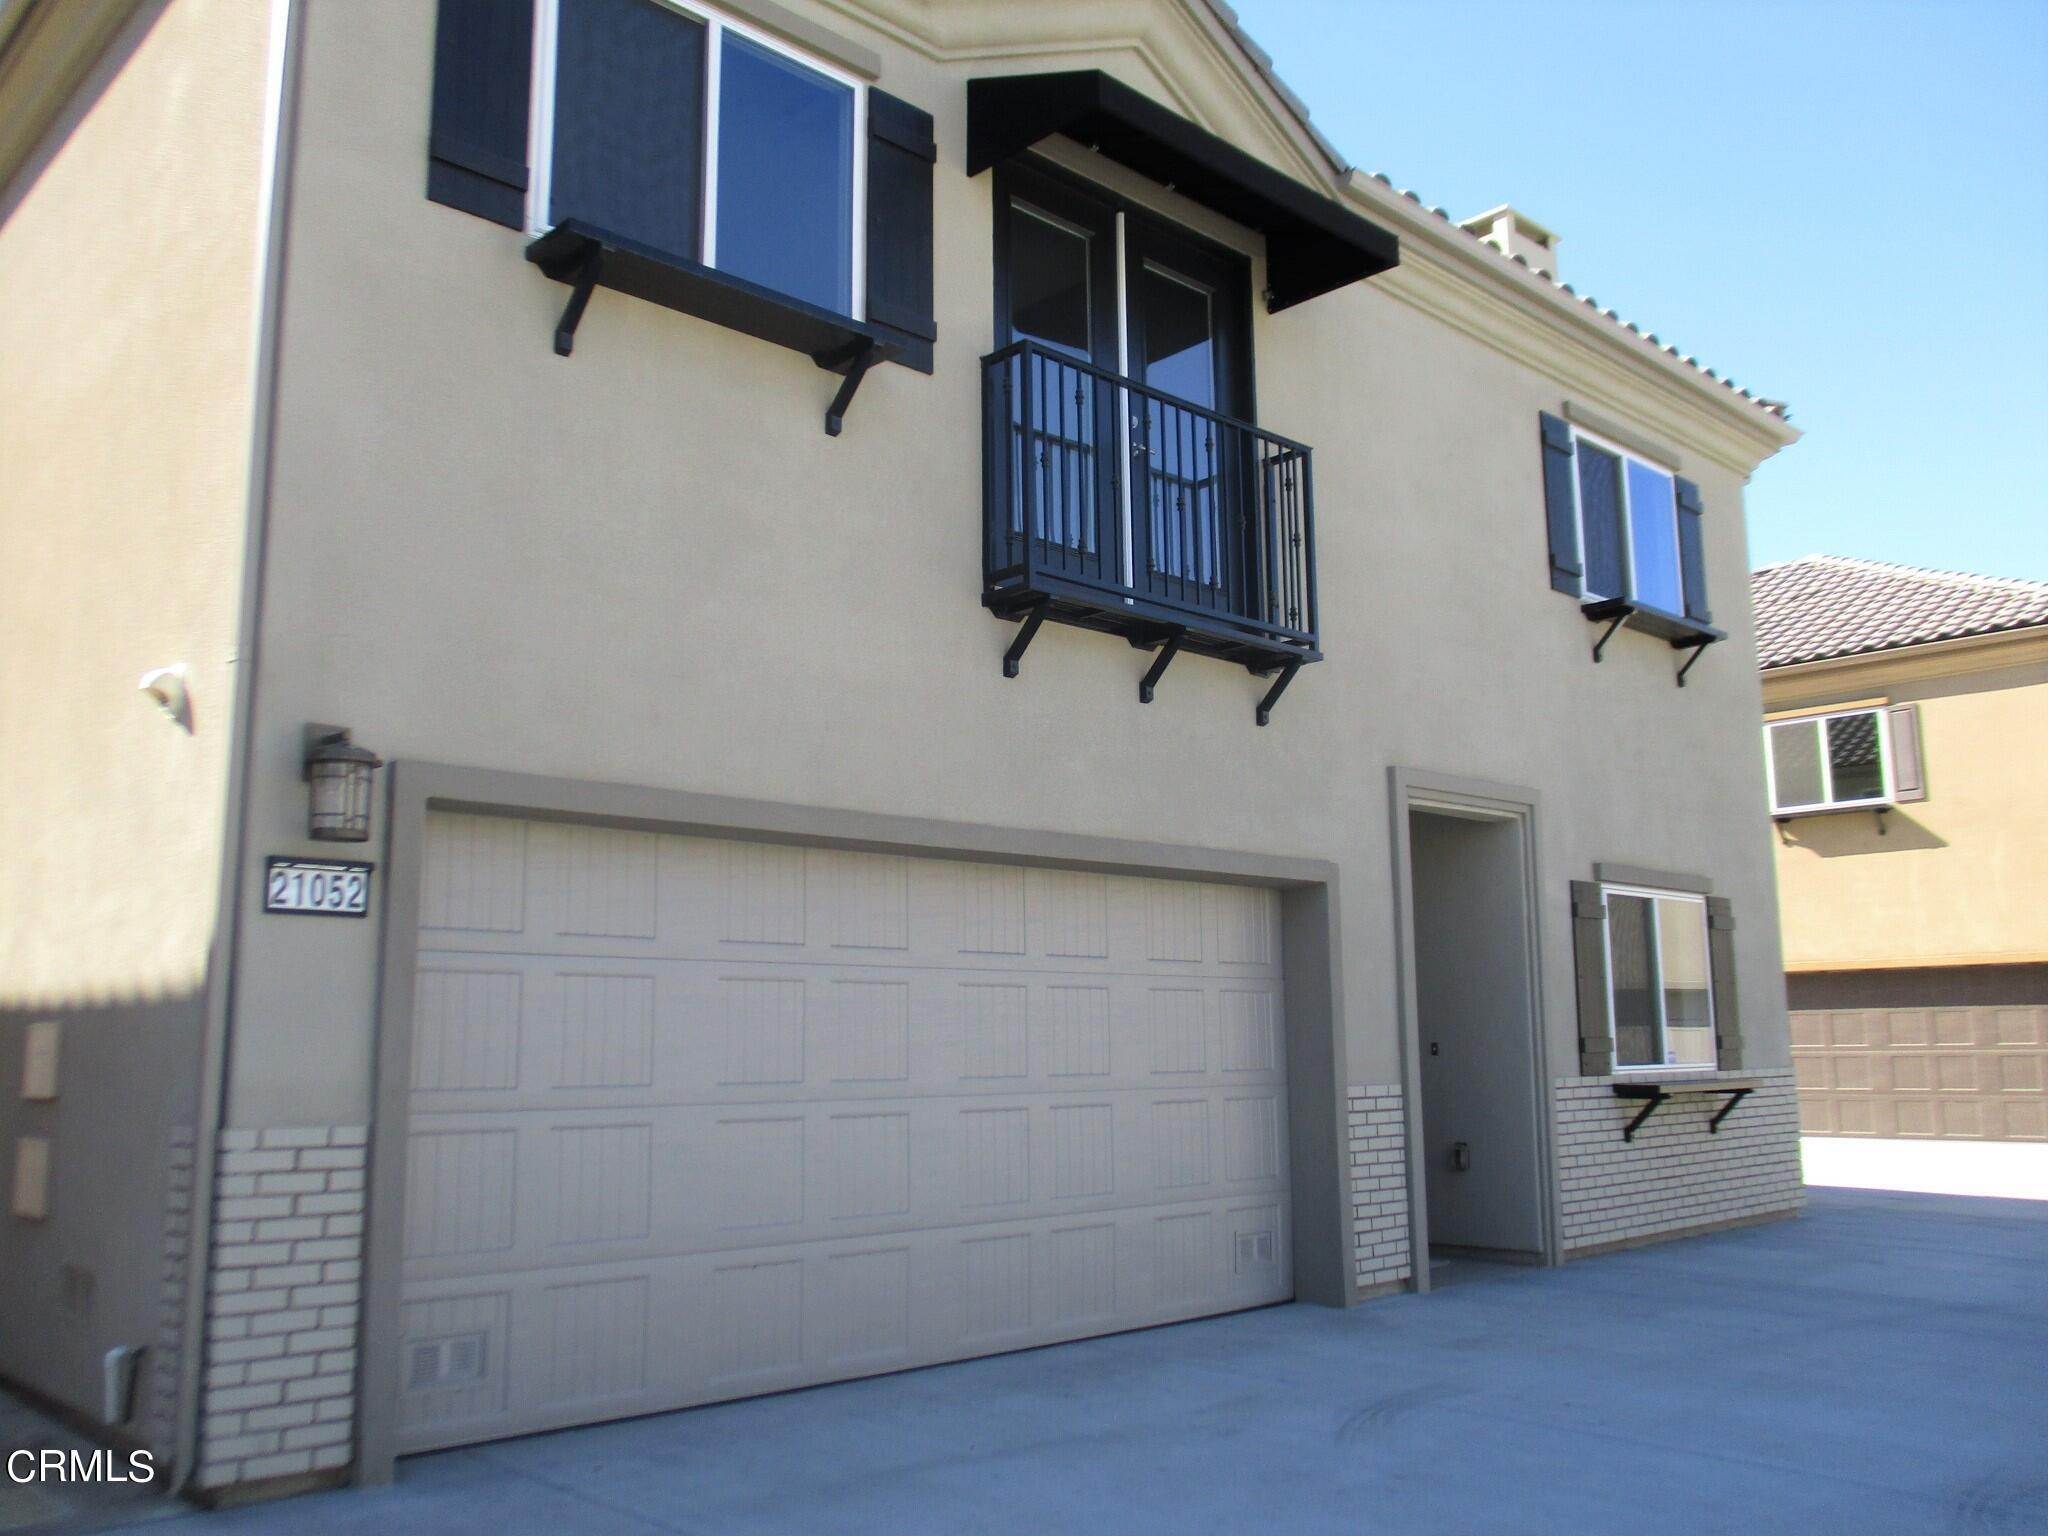 16. townhouses at 21052 East Cypress Street Covina, California 91724 United States